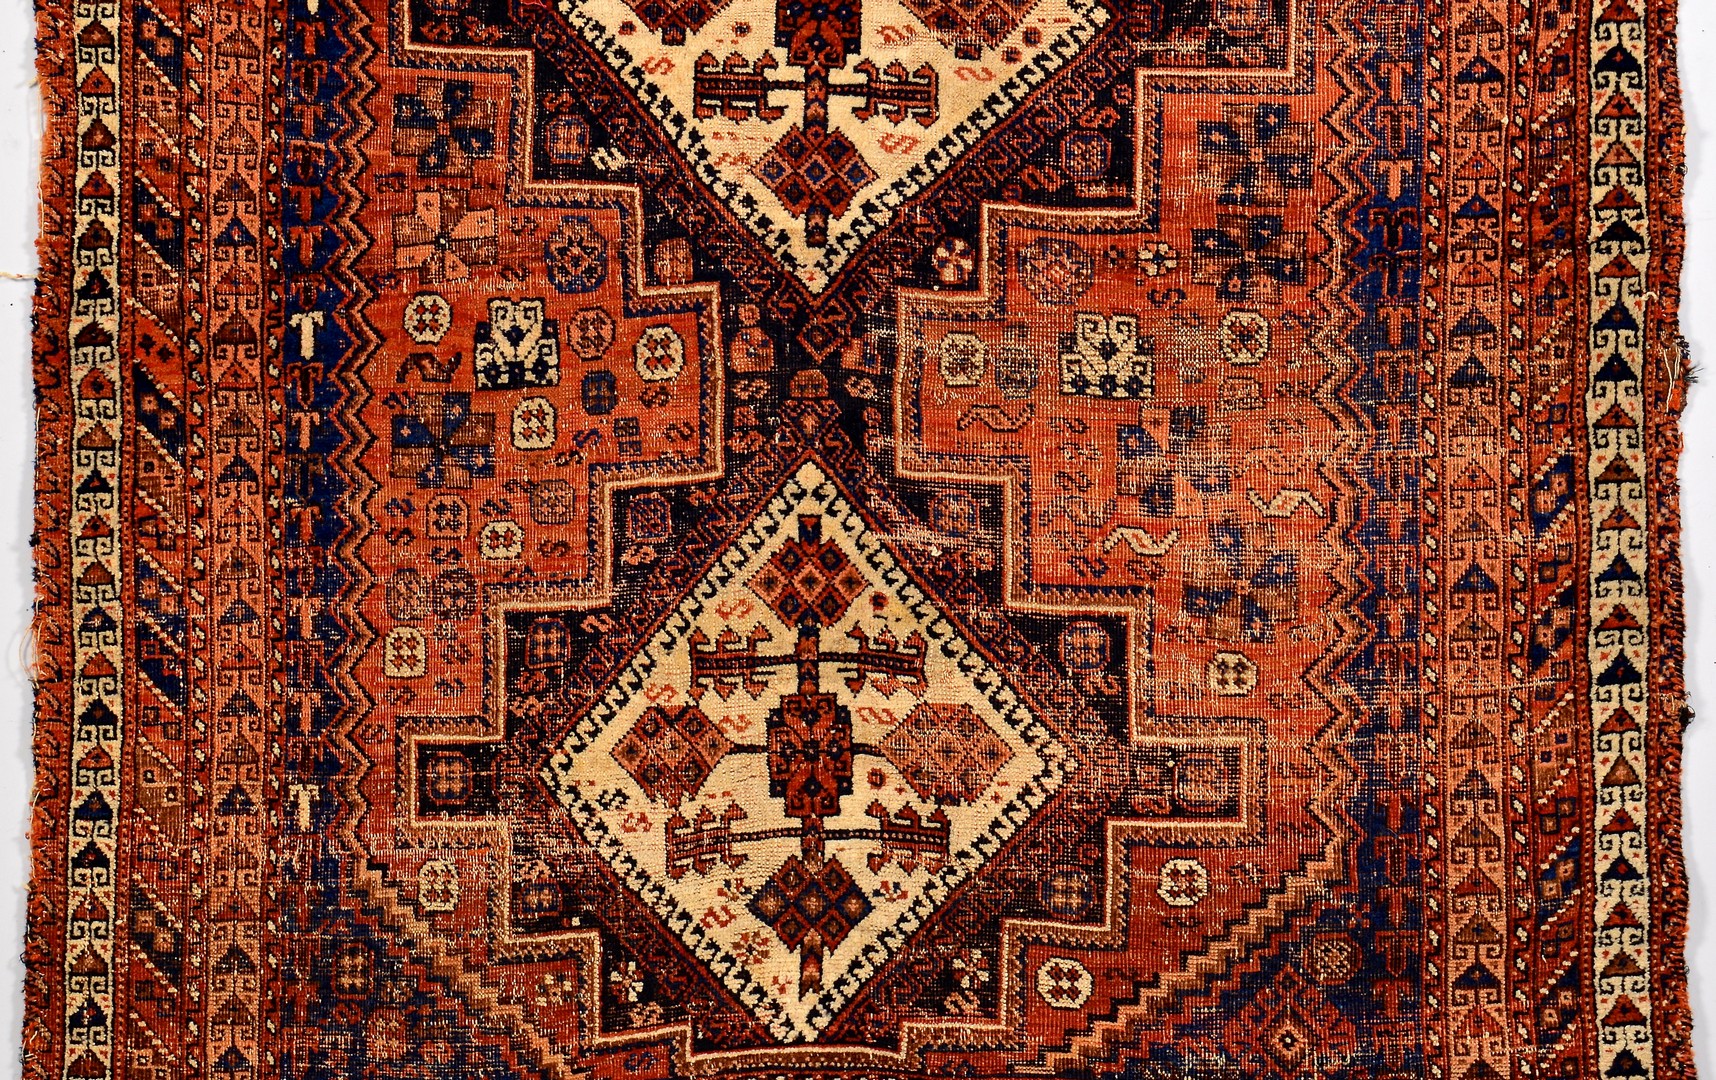 Lot 912: Group of 3 Antique Tribal Area Rugs